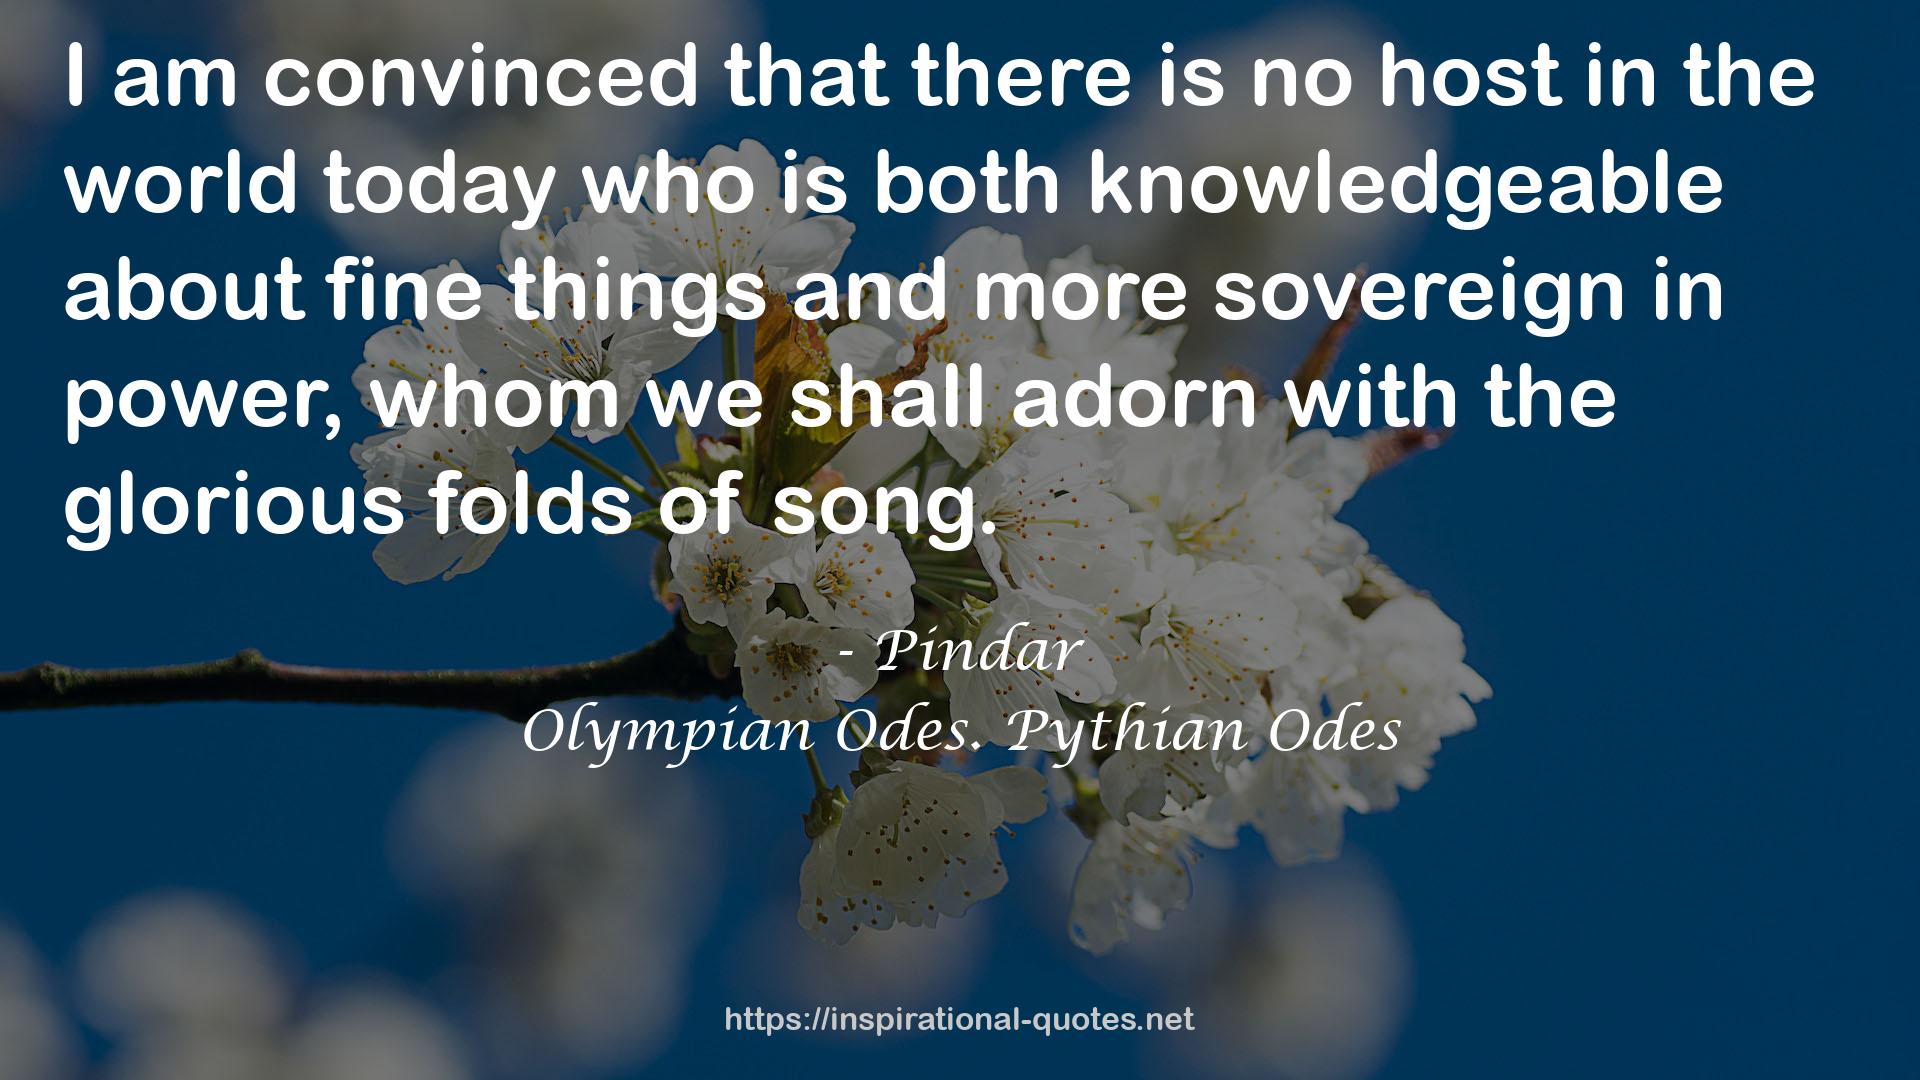 Olympian Odes. Pythian Odes QUOTES